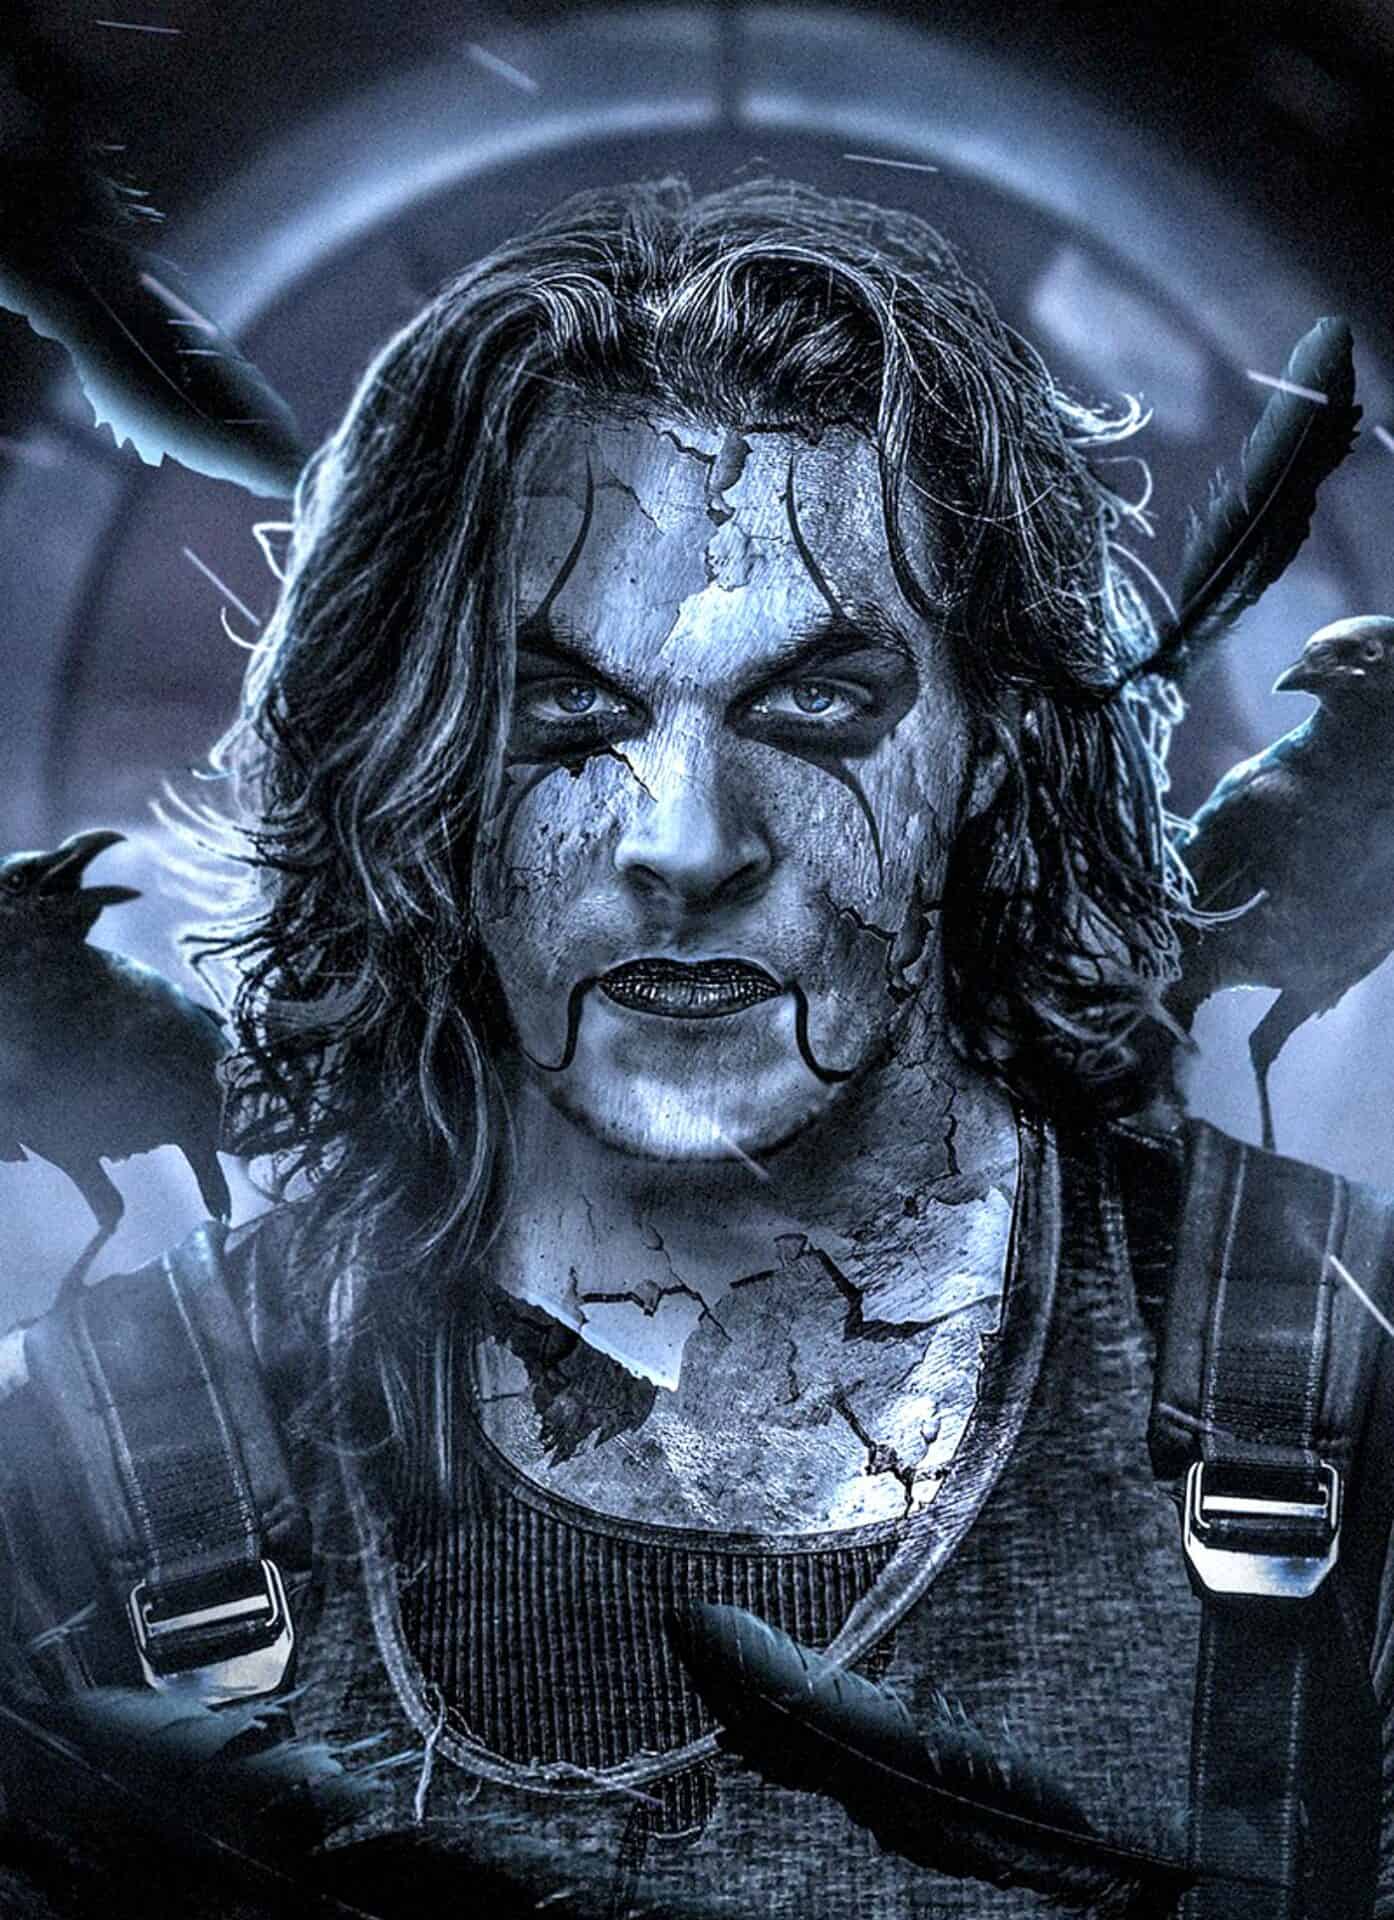 Sony Announces 2019 Release Date For The Crow Film Reboot Starring Jason Momoa ...1400 x 1928